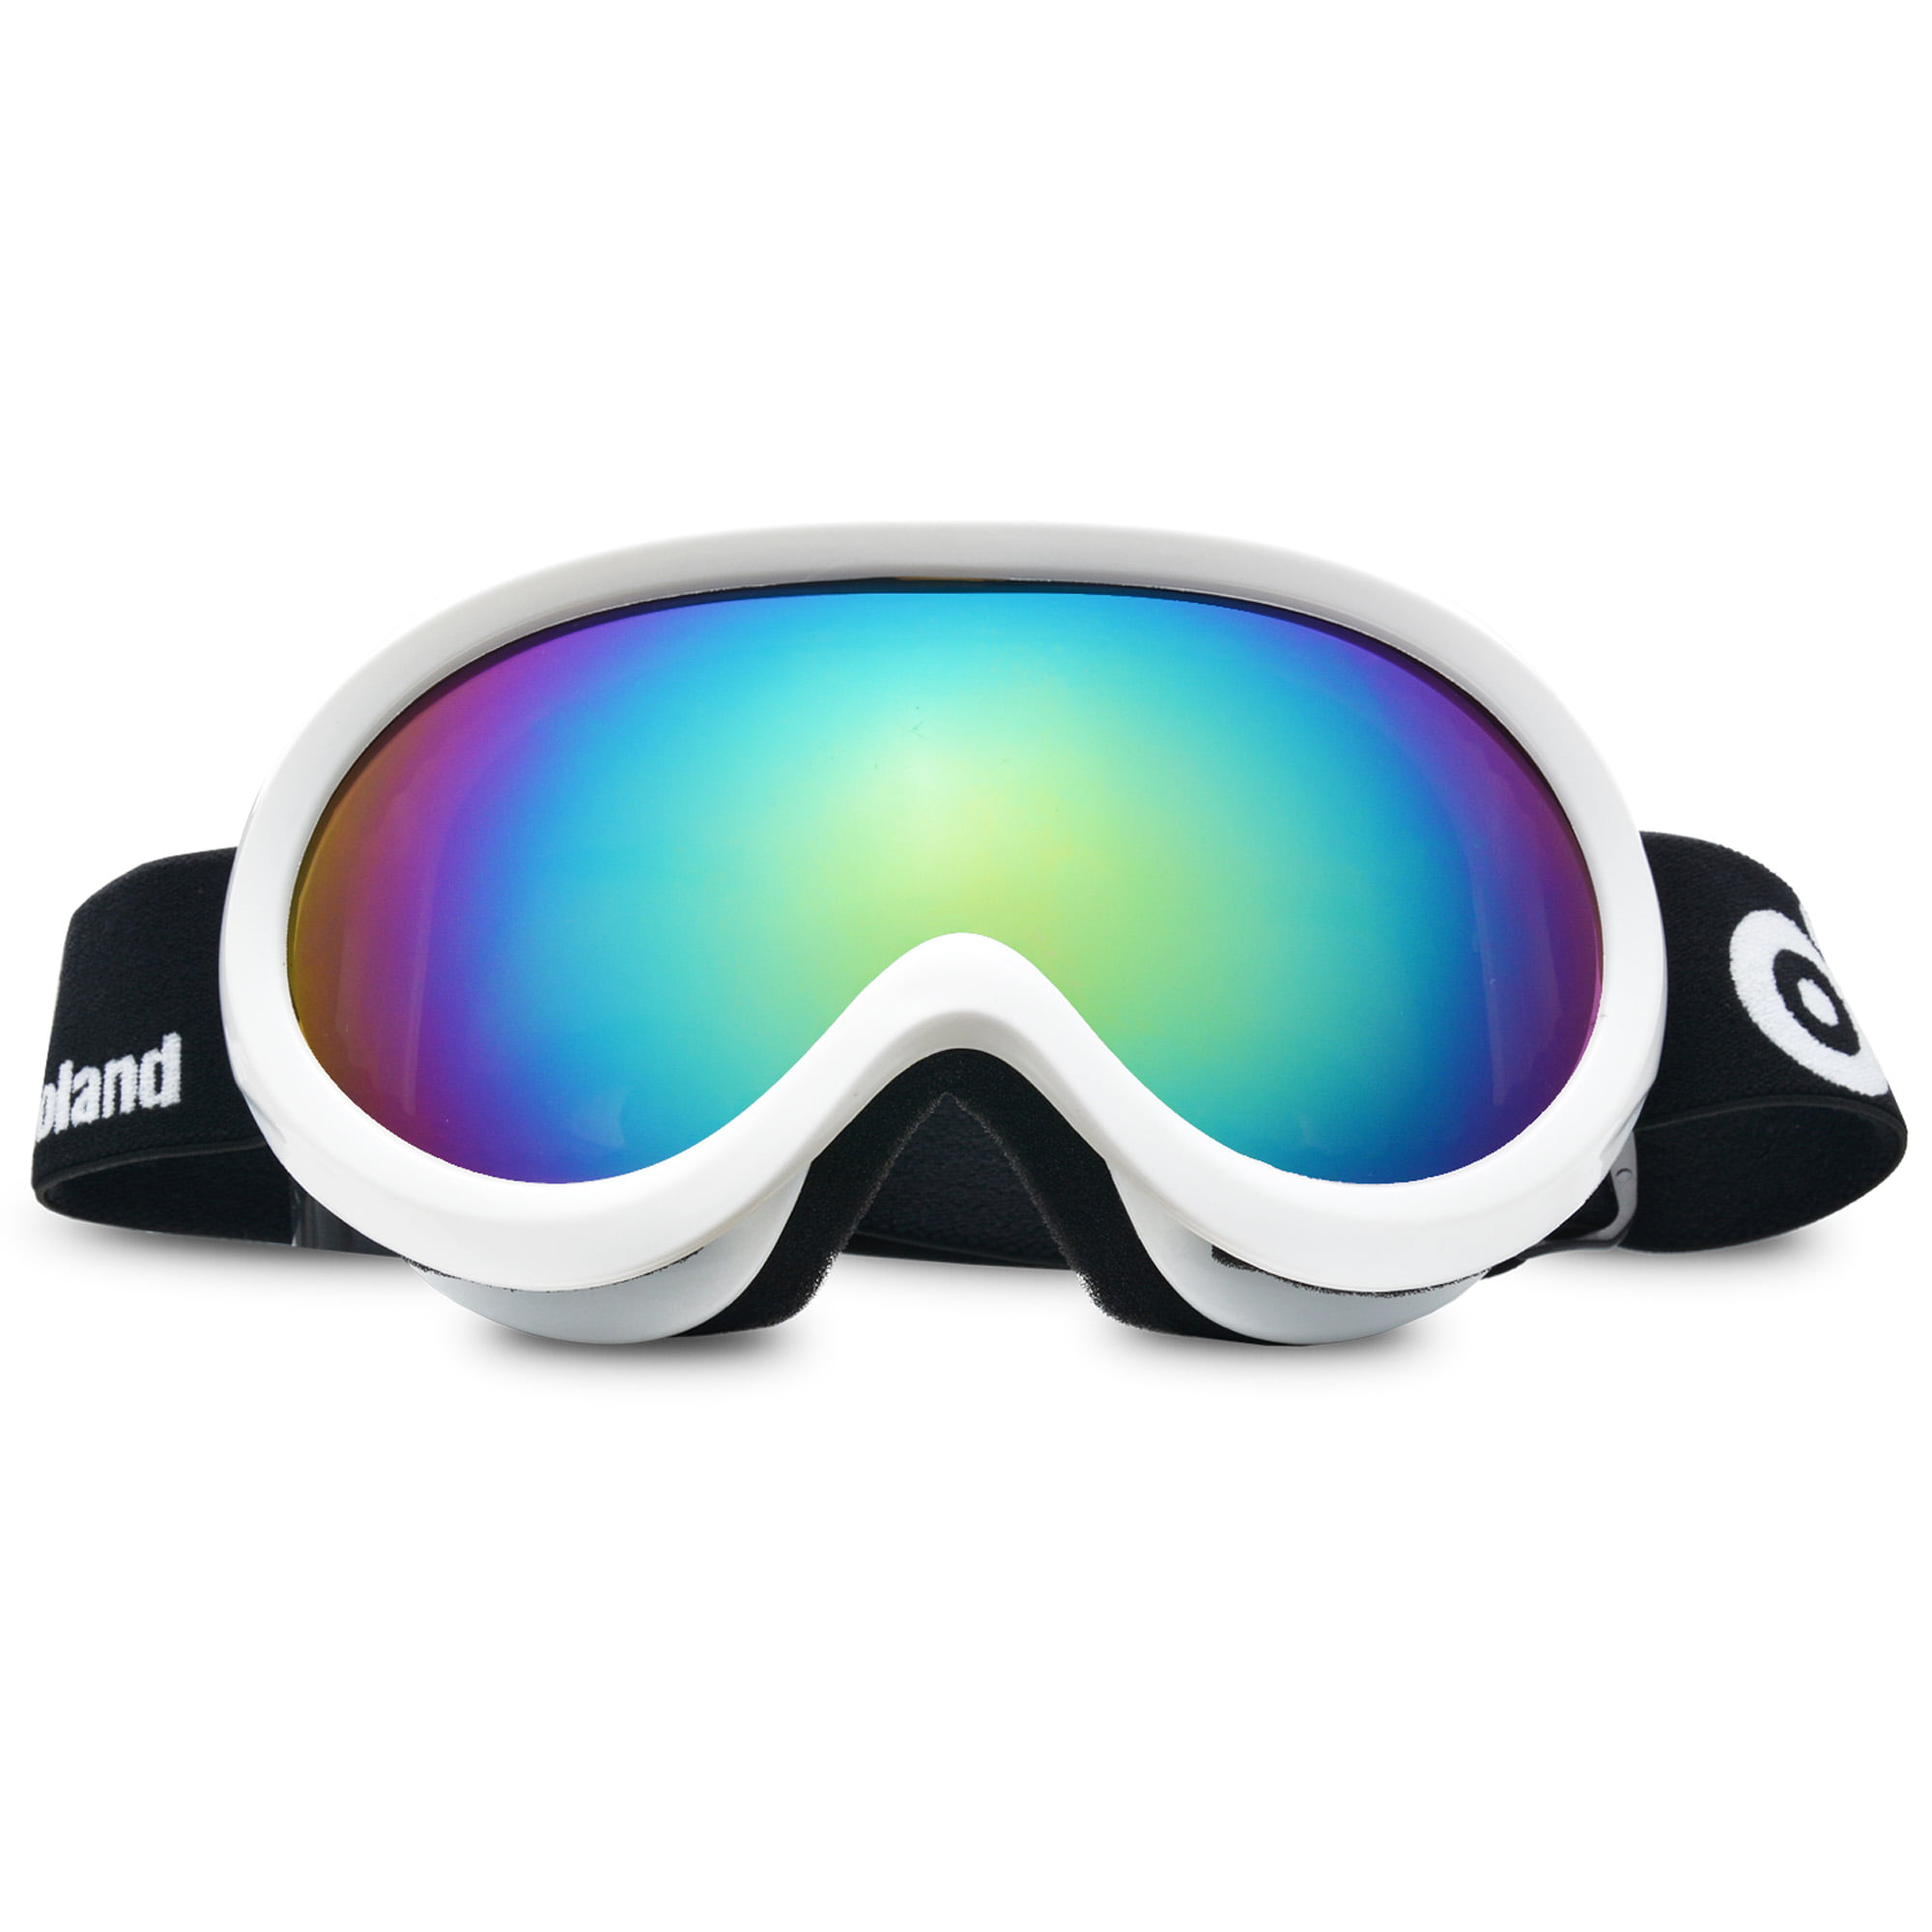 Odoland Kids Ski Goggles Snow Goggles S2 Double Lens Anti-Fog UV Protection Snowboard Goggles for Youth Skiing Age 8-16 